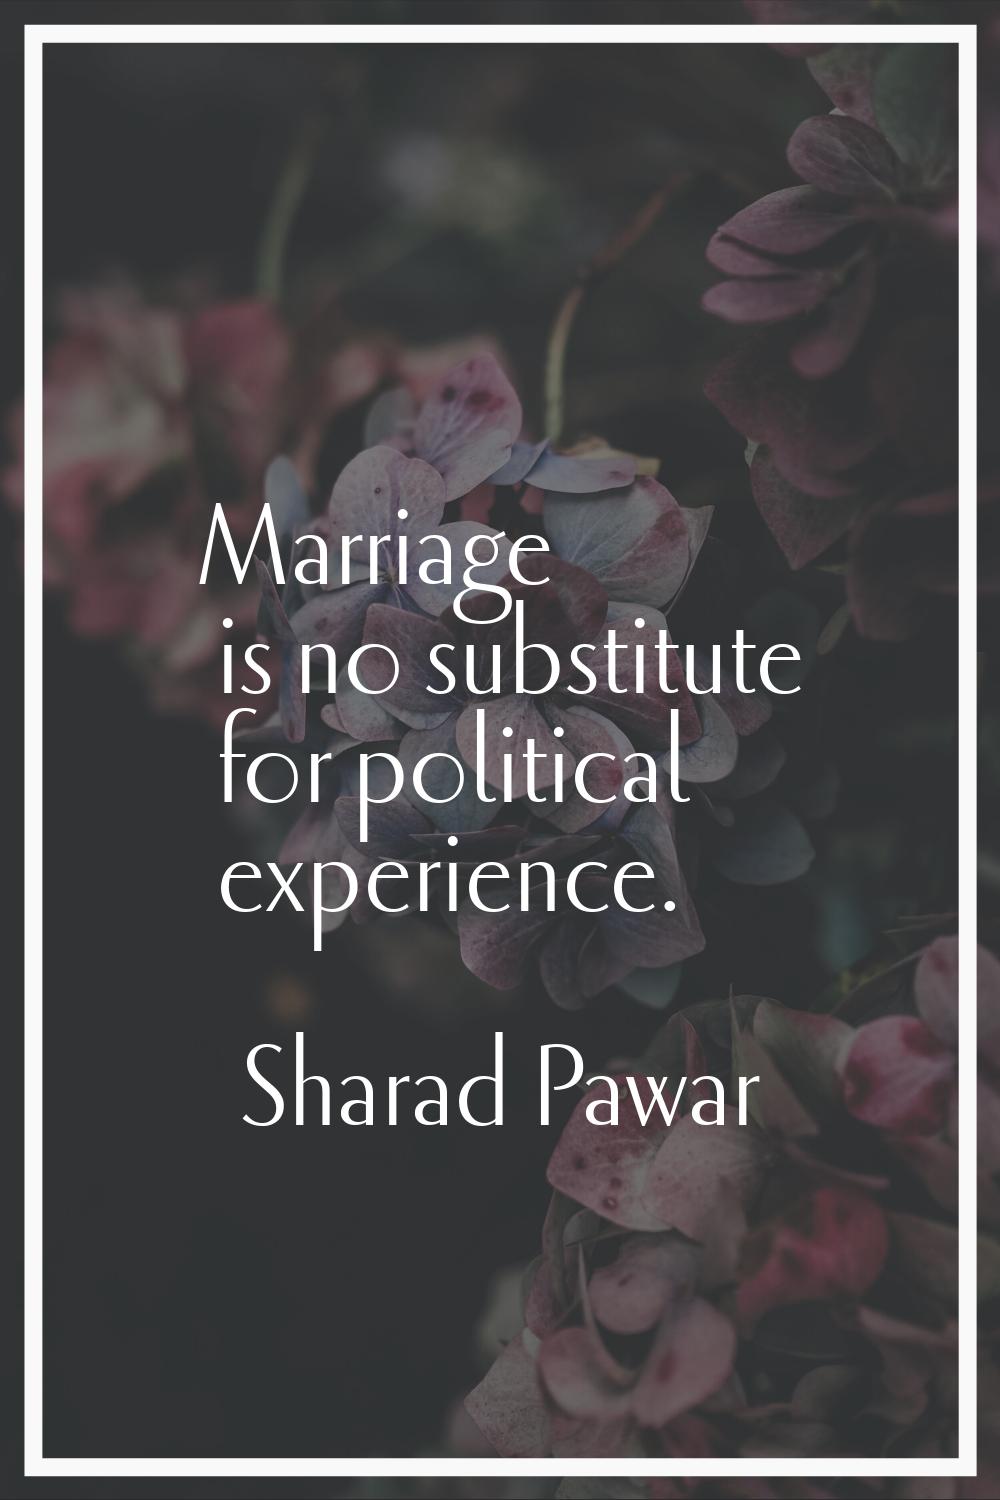 Marriage is no substitute for political experience.